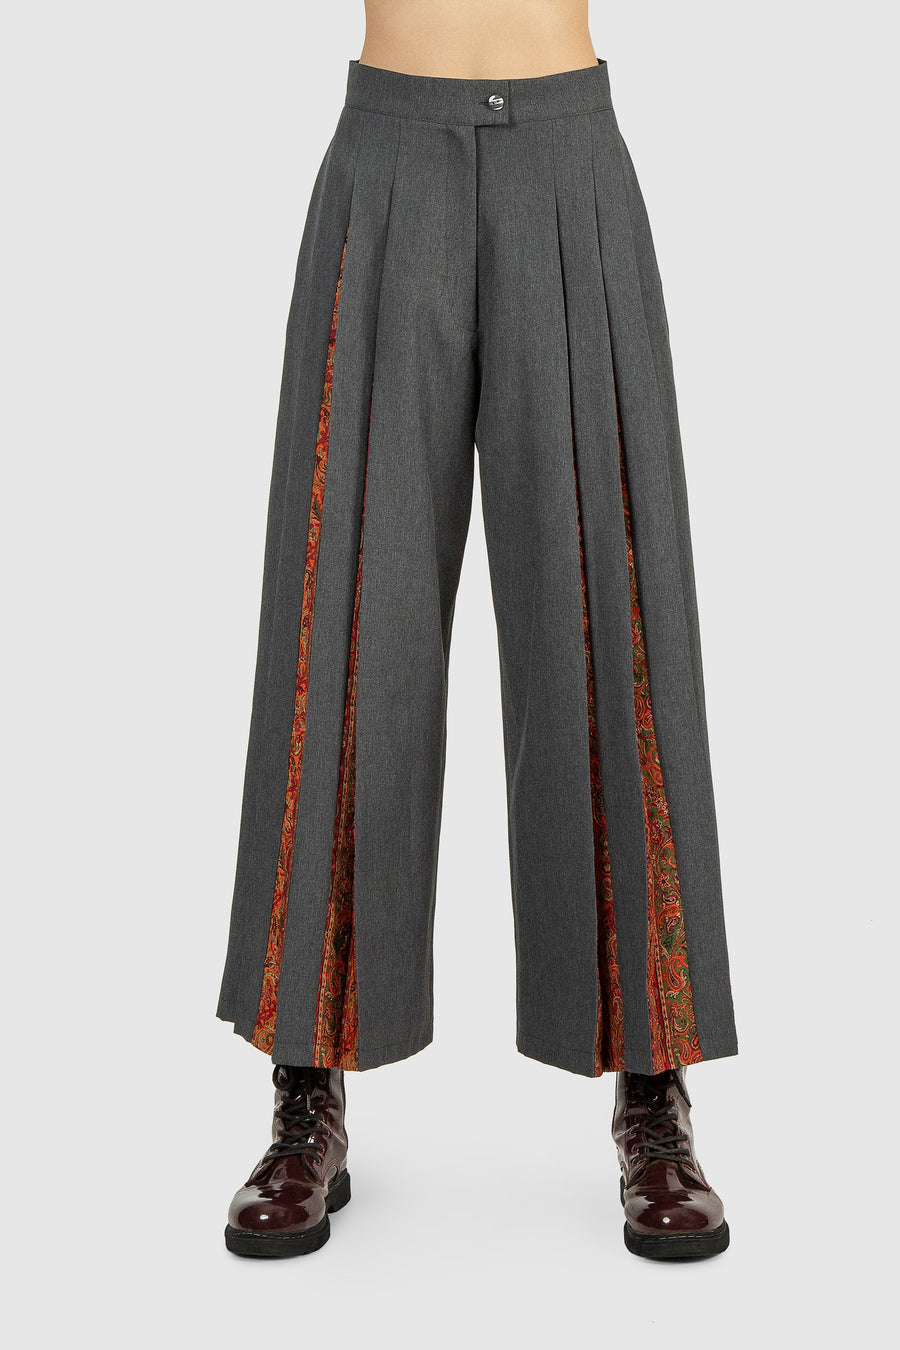 Crown Shell Flaming Culottes